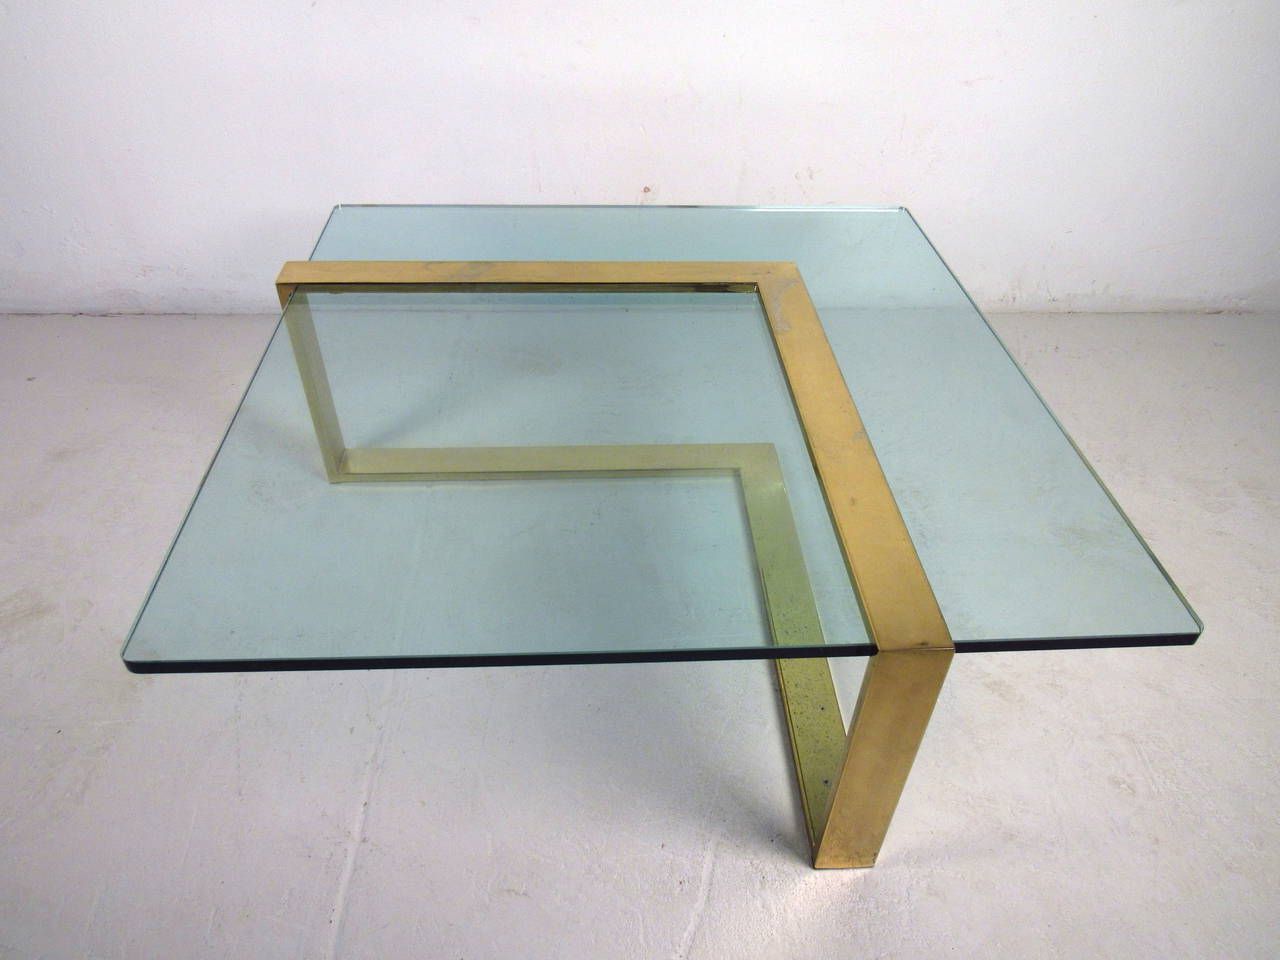 2018 L Shaped Coffee Tables With Regard To Brass L Shape Coffee Table With Glass Top At 1stdibs (View 6 of 20)